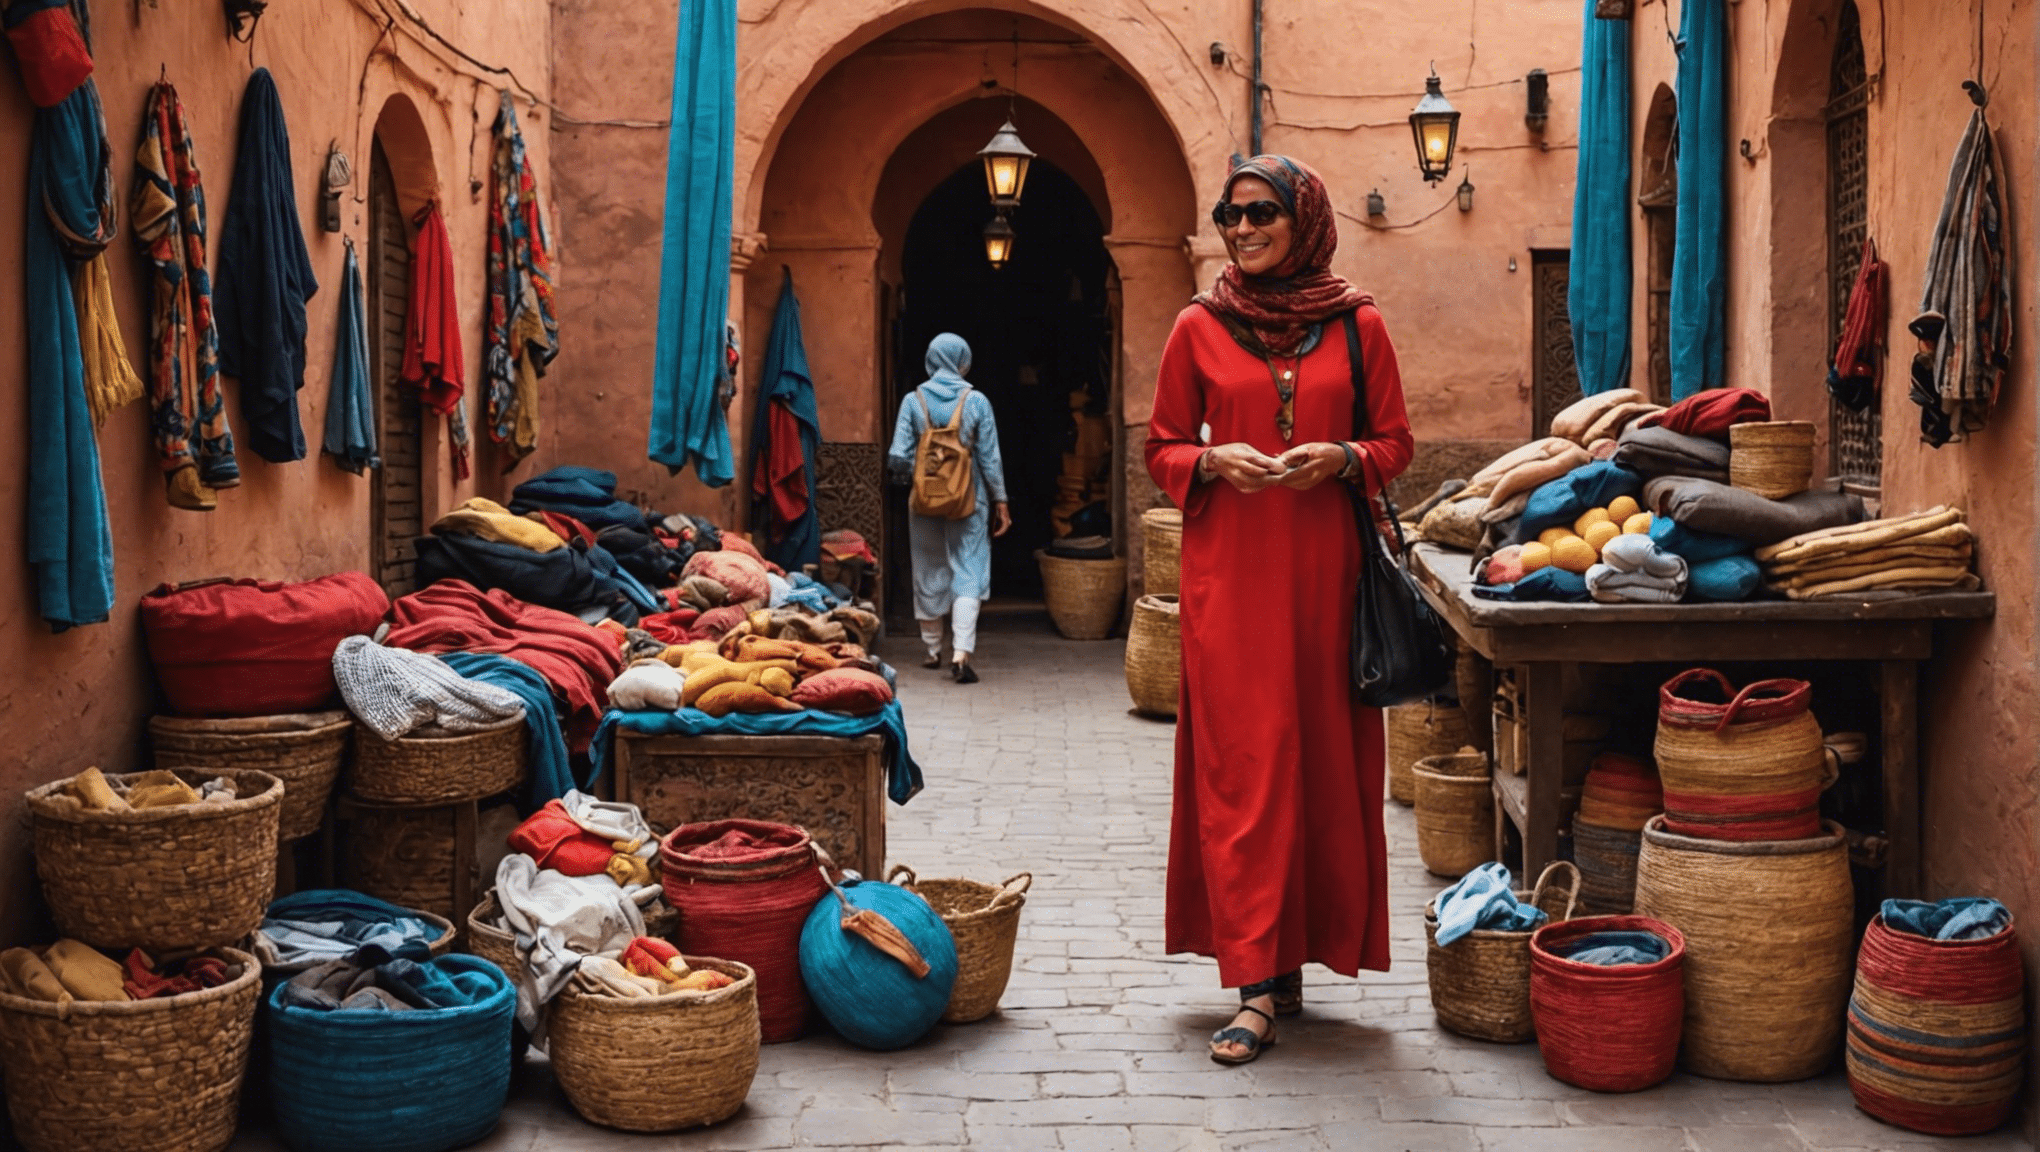 find out what essentials to pack for your ultimate adventure in marrakech in april and make the most of your trip with our helpful tips and suggestions.